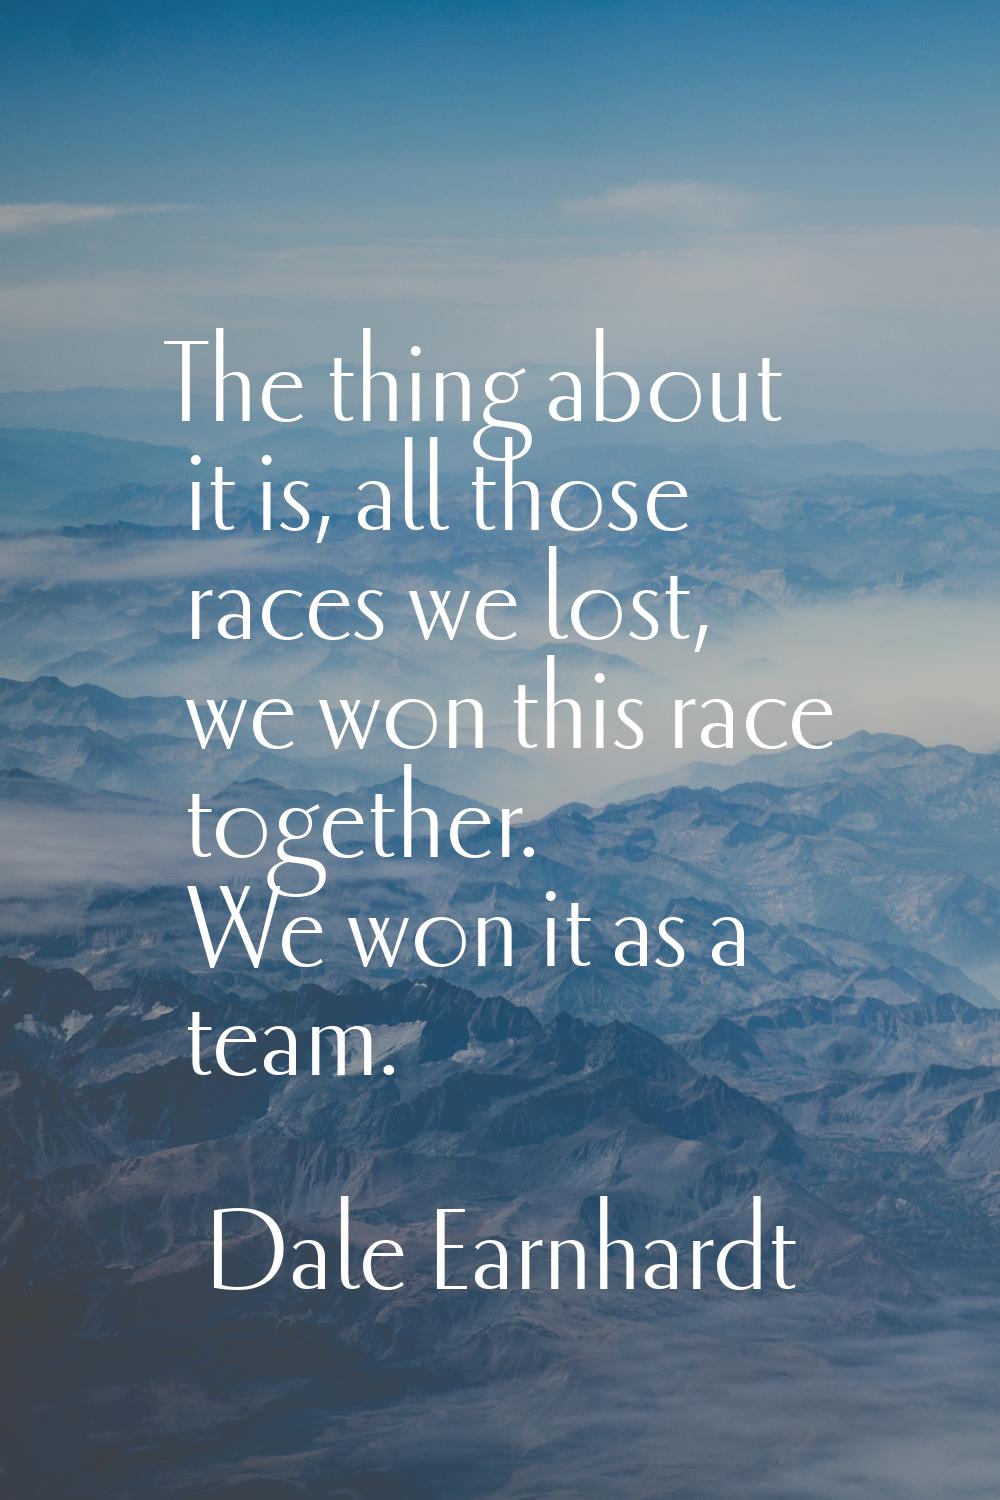 The thing about it is, all those races we lost, we won this race together. We won it as a team.